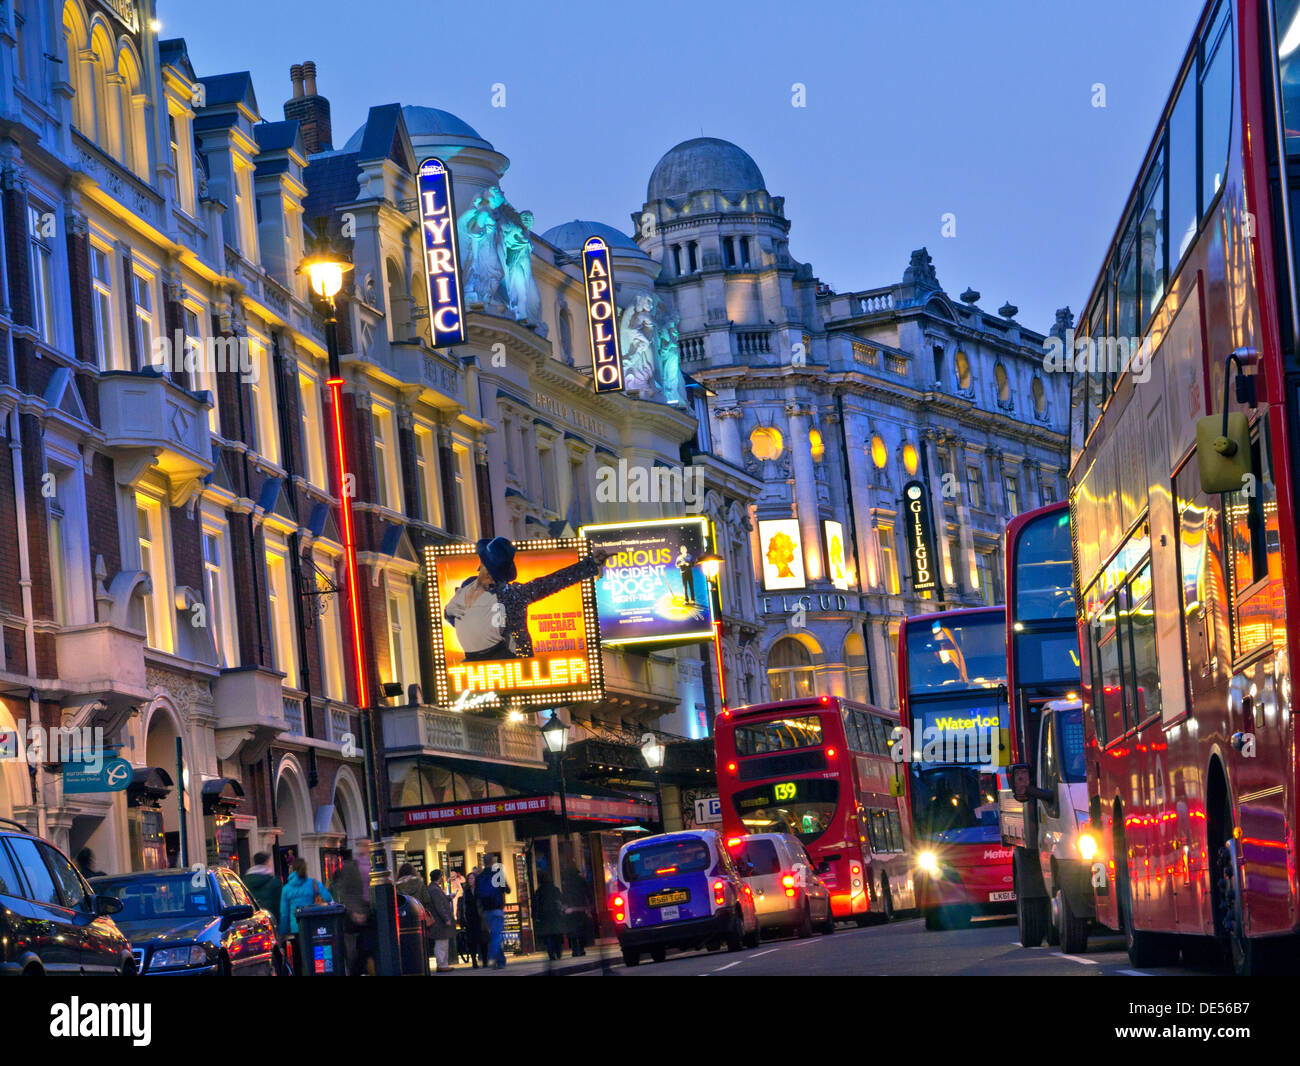 London Lyric Apollo Gielgud Theatres Theatreland entertainment capital busy with people red buses and taxis in Shaftesbury Avenue West End London UK Stock Photo